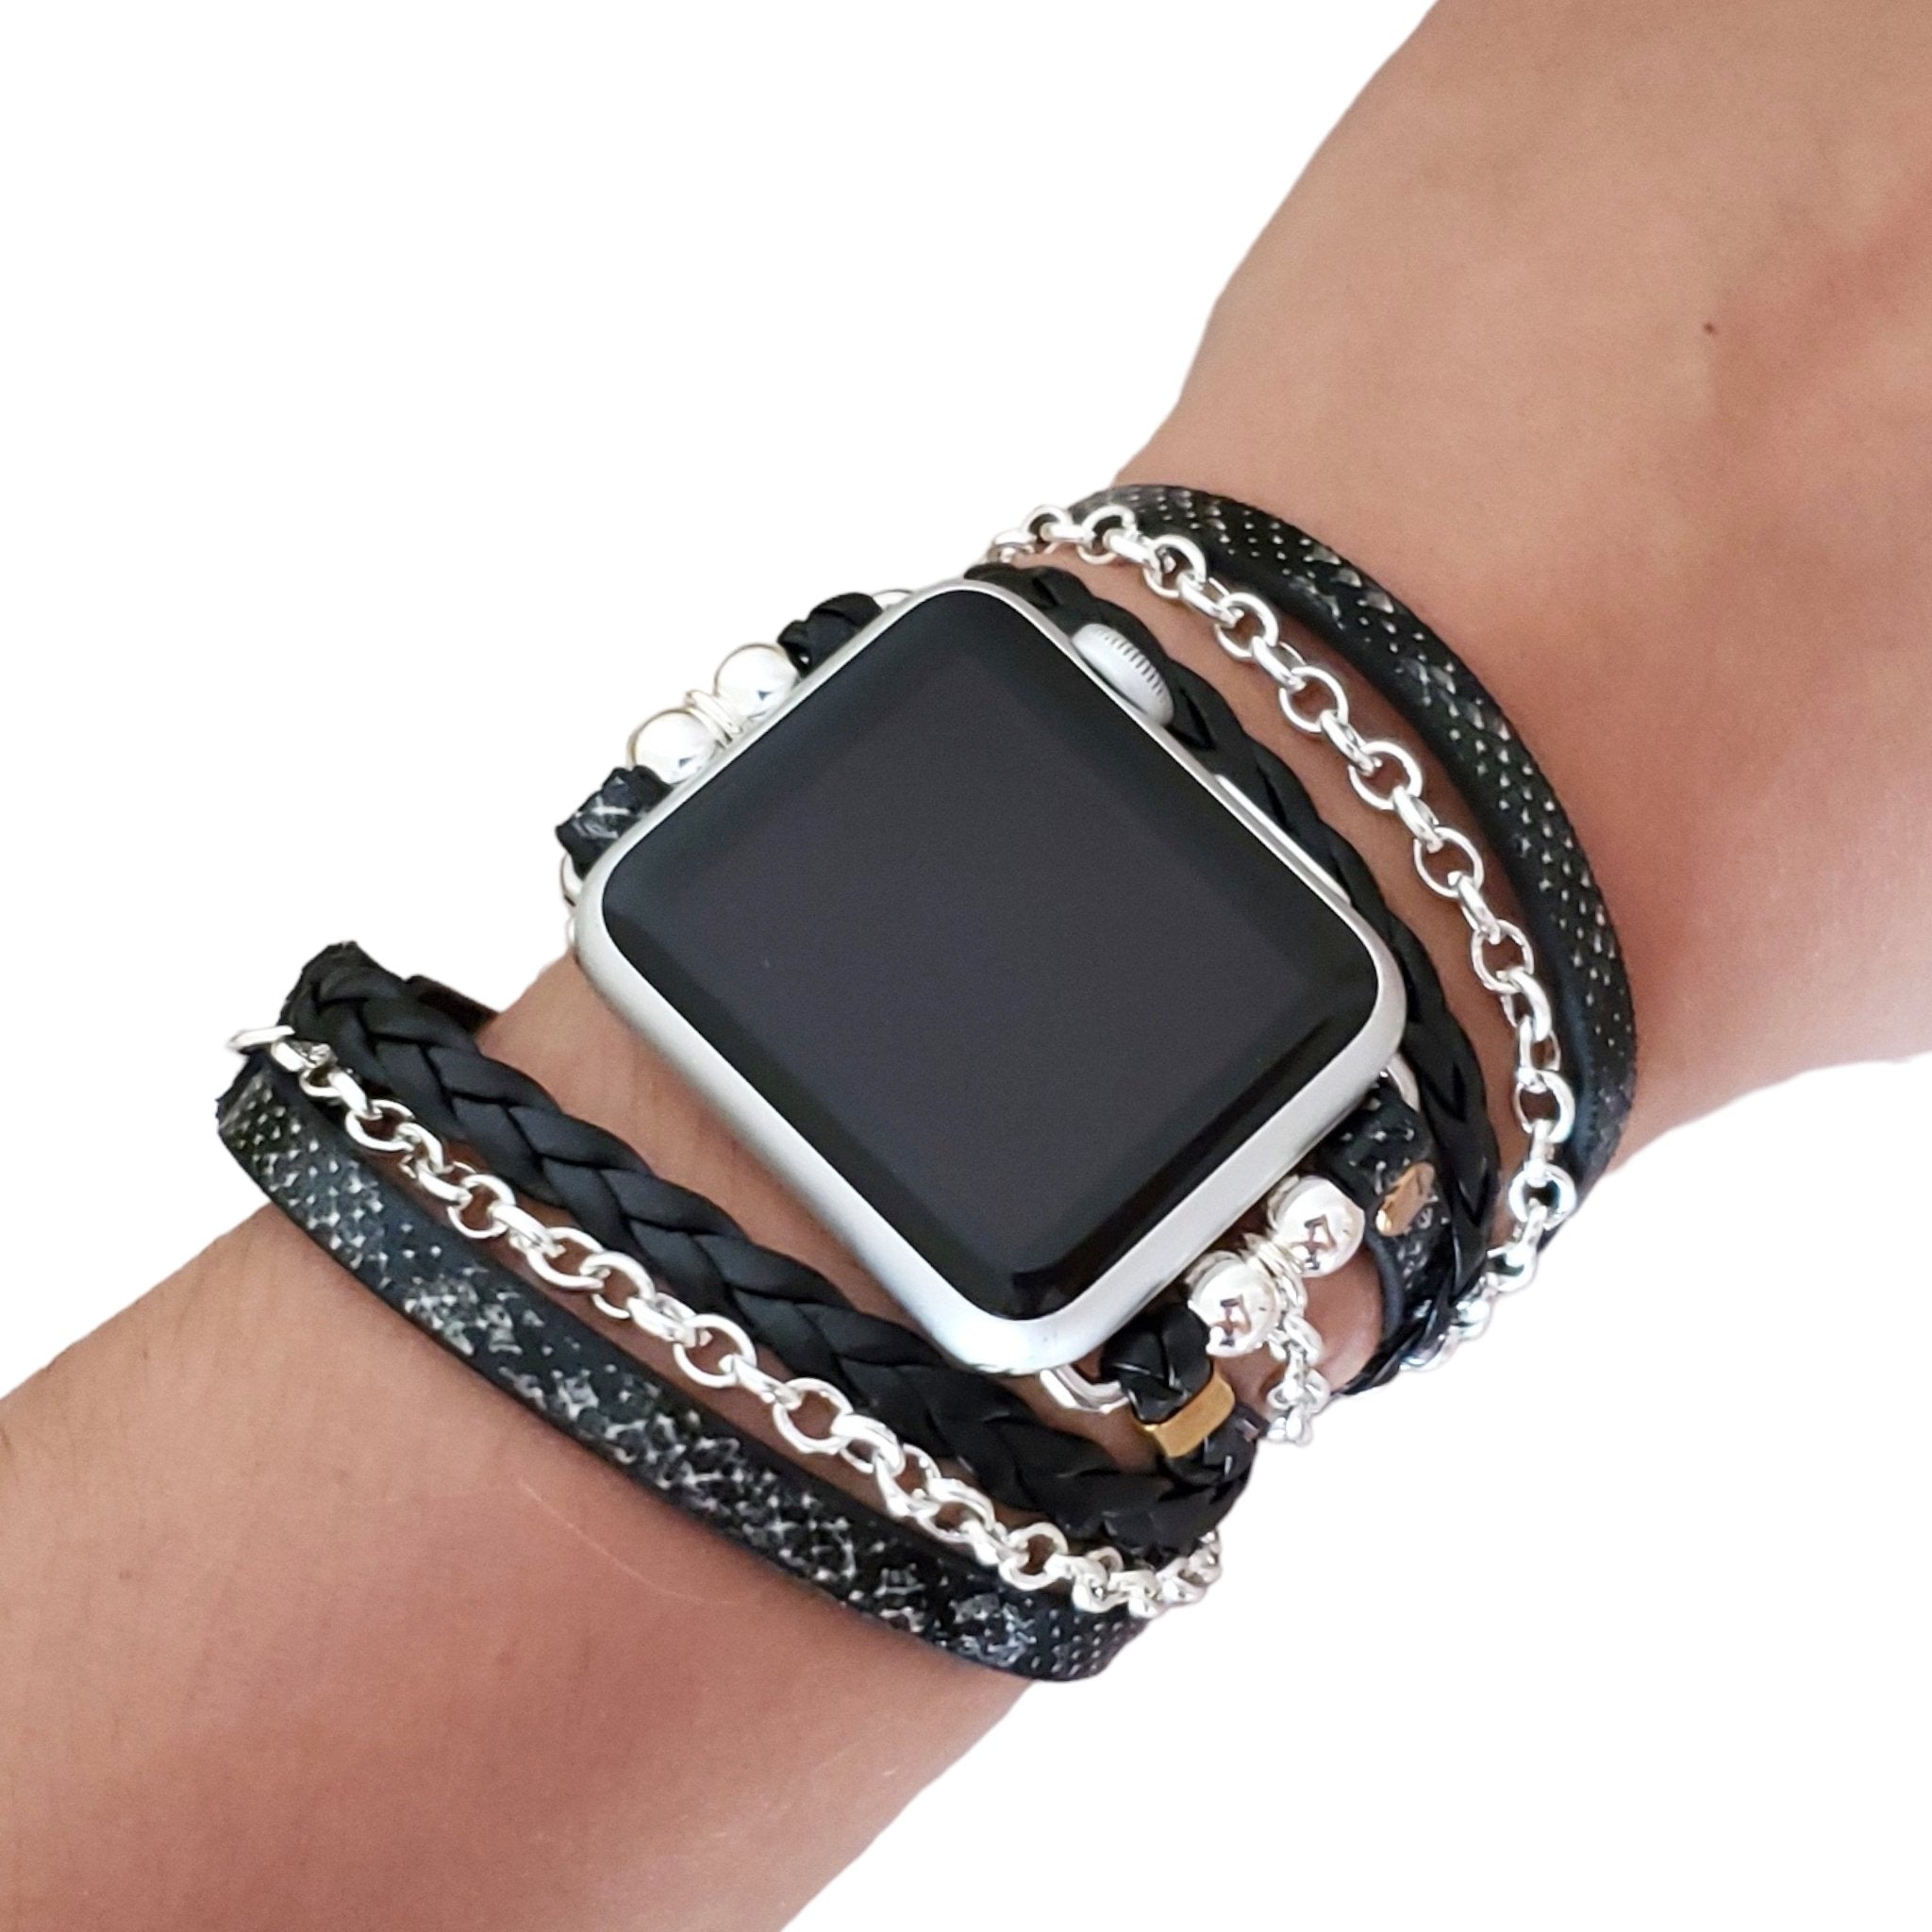 Boho Chic Watch Bracelet, Layered Watch Bracelet, Snake Print Vegan Leather, Chain Detail, Apple Watch Bracelet, Bohemian Style, Fashionable Apple Watch Band, All Series and Sizes, Stylish Apple Watch Accessory, Trendy Watch Bracelet, Vegan Leather Apple Watch Band